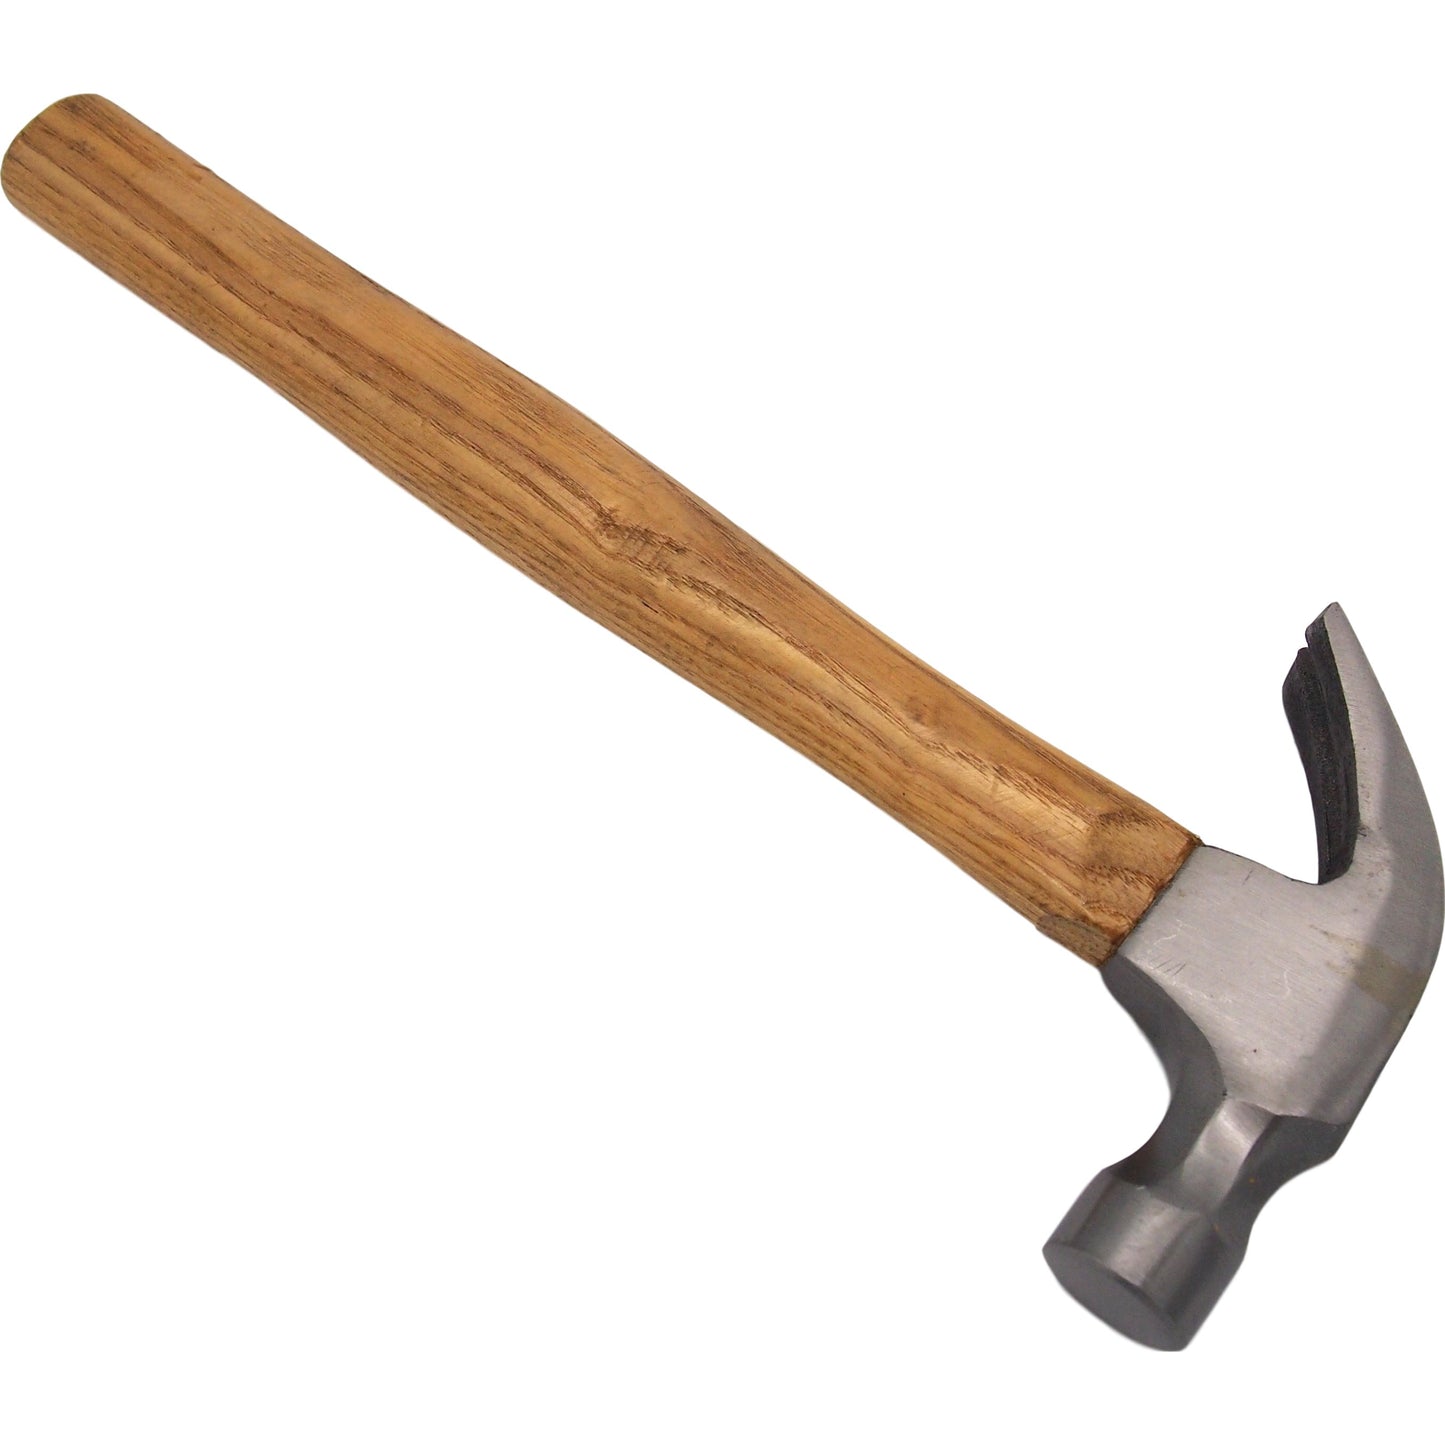 Claw Hammer Contractor Woodworking Home Repair Tool 8oz